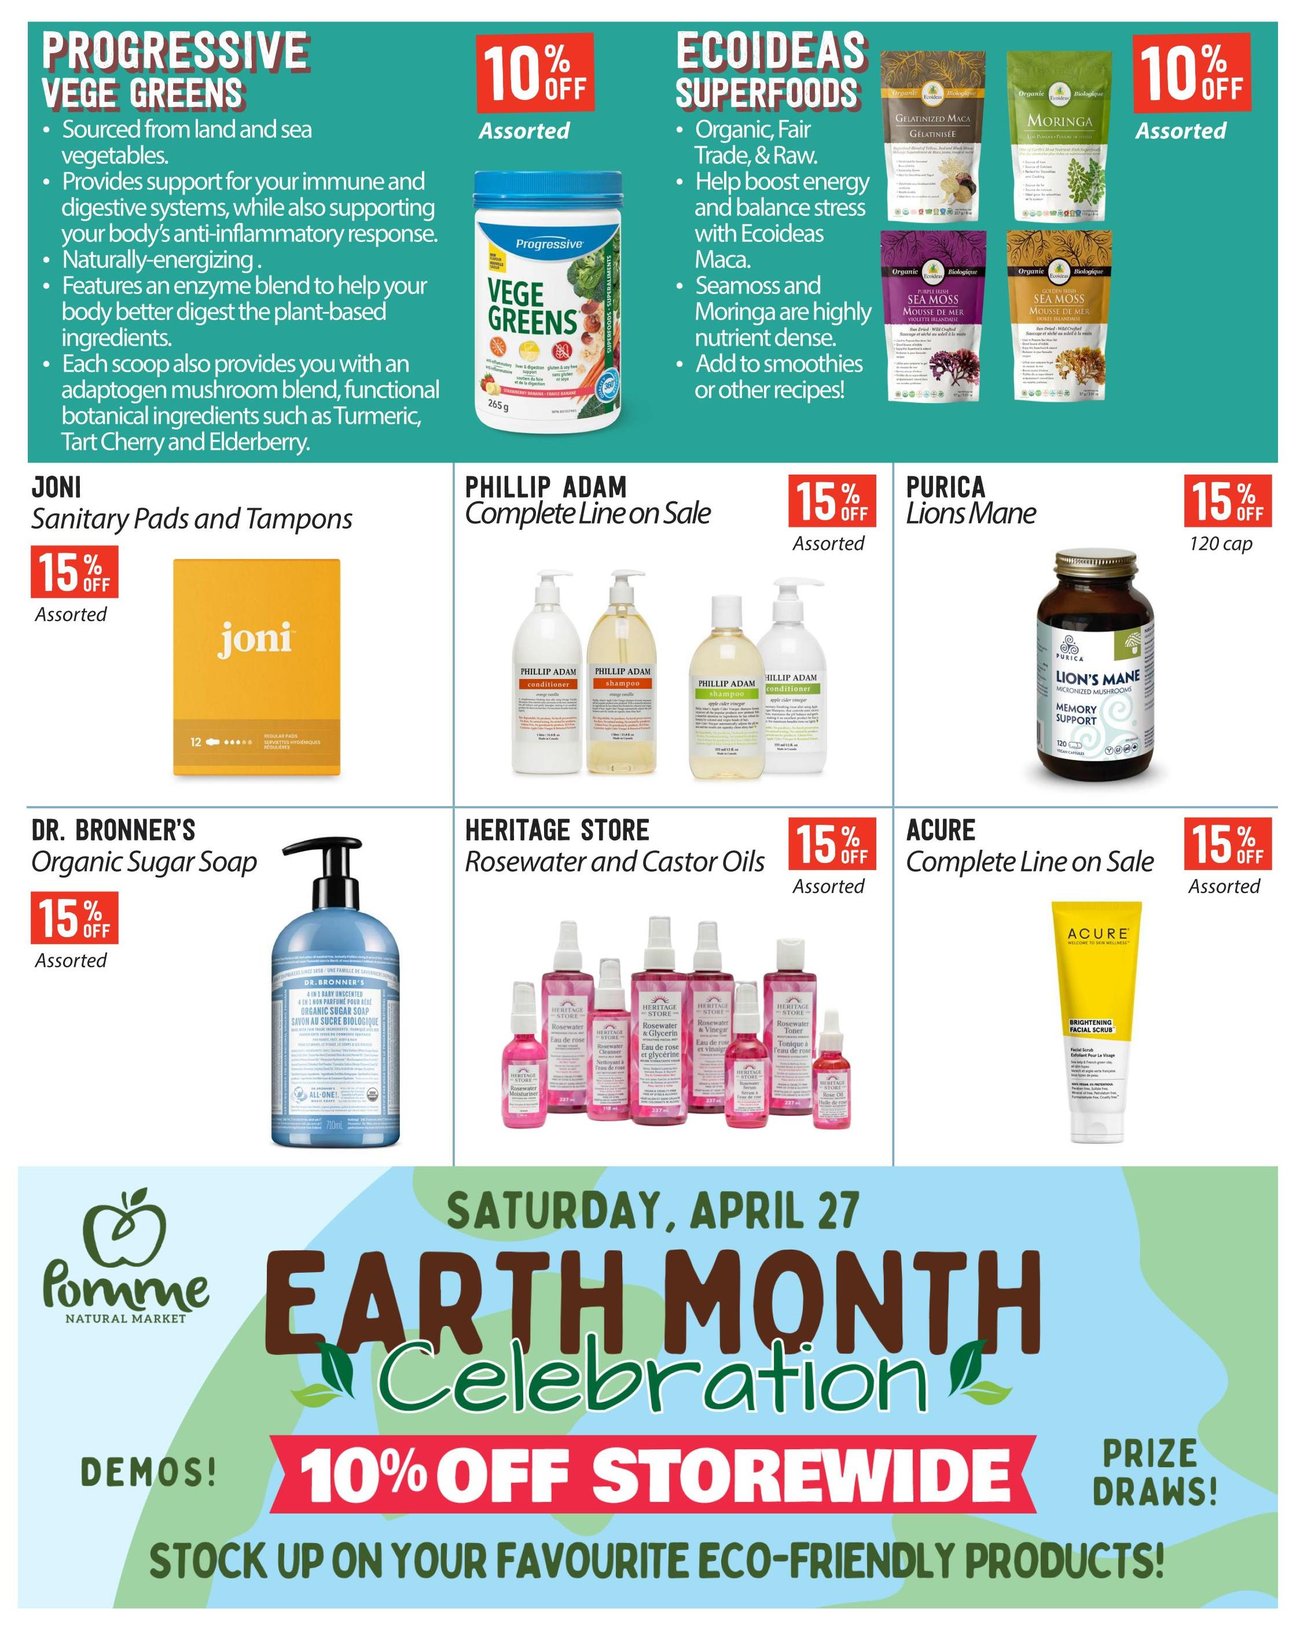 Pomme Natural Market - Monthly Savings - Page 12